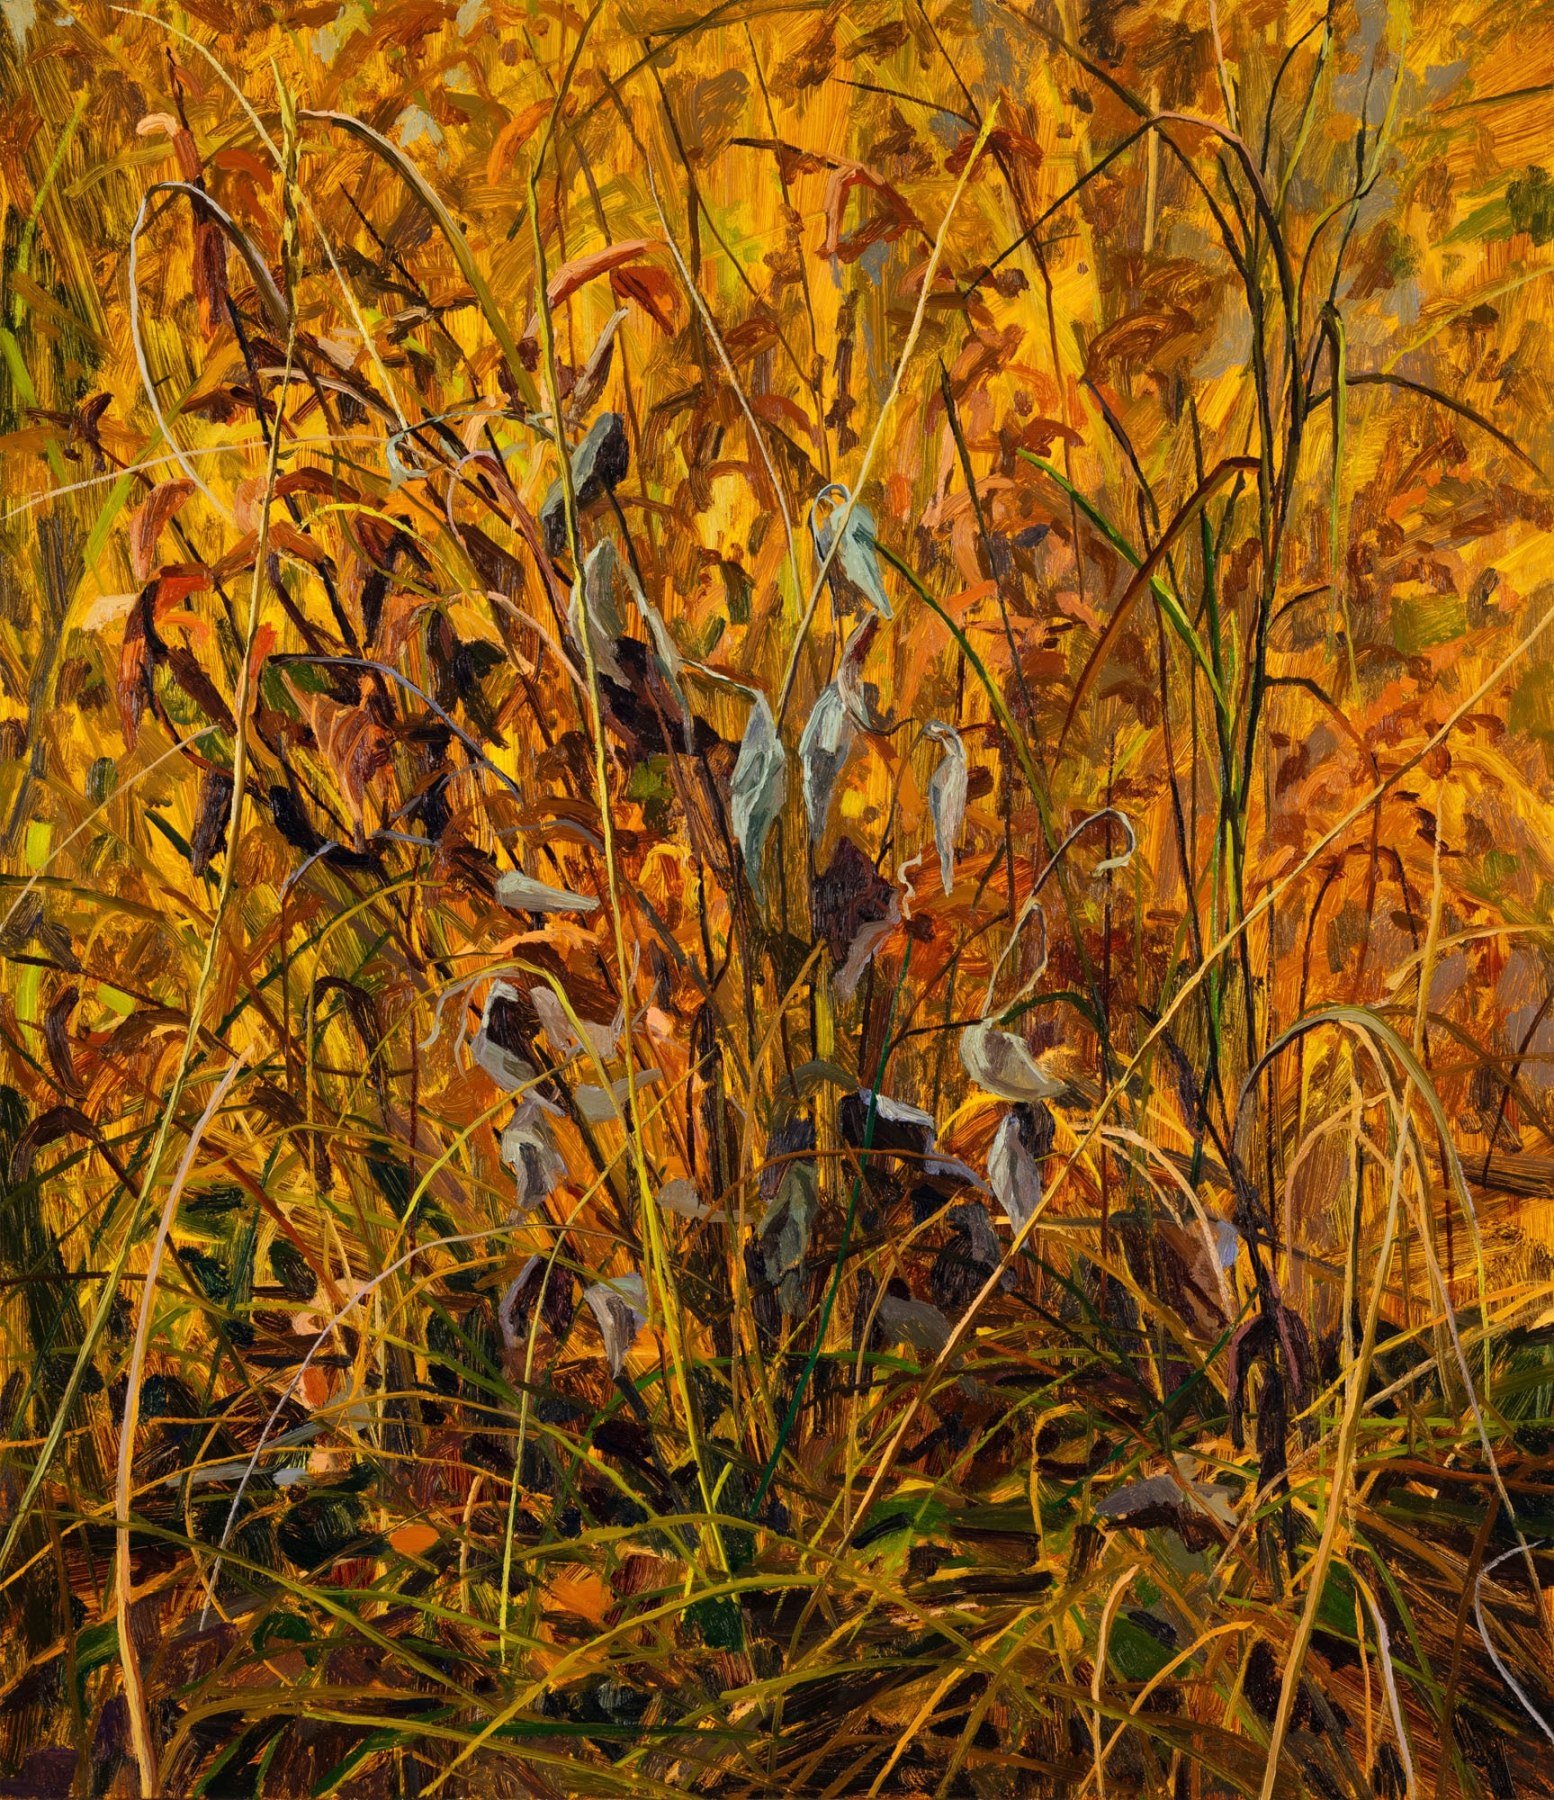 Claire Sherman, Grass and Leaves, 2021. Oil on canvas, 30 x 26 inches